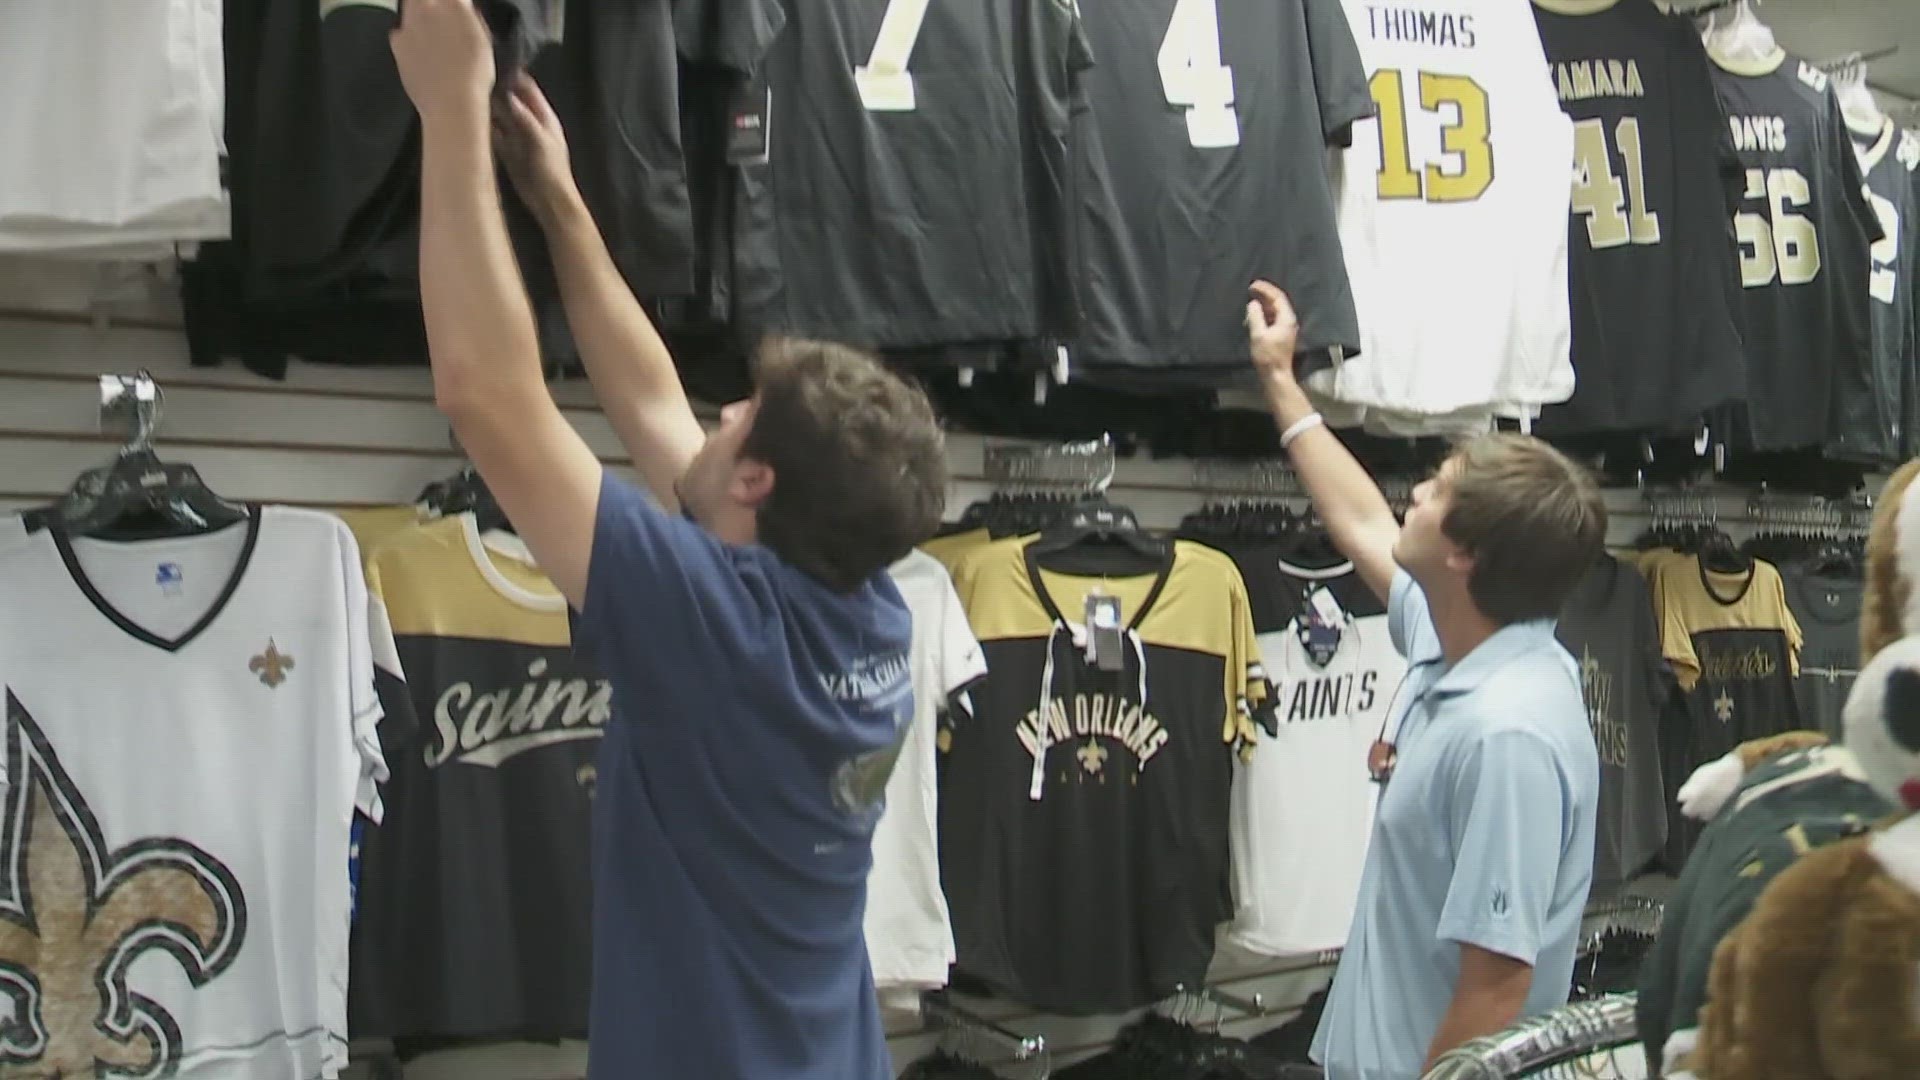 Saints fans gear up for first home game